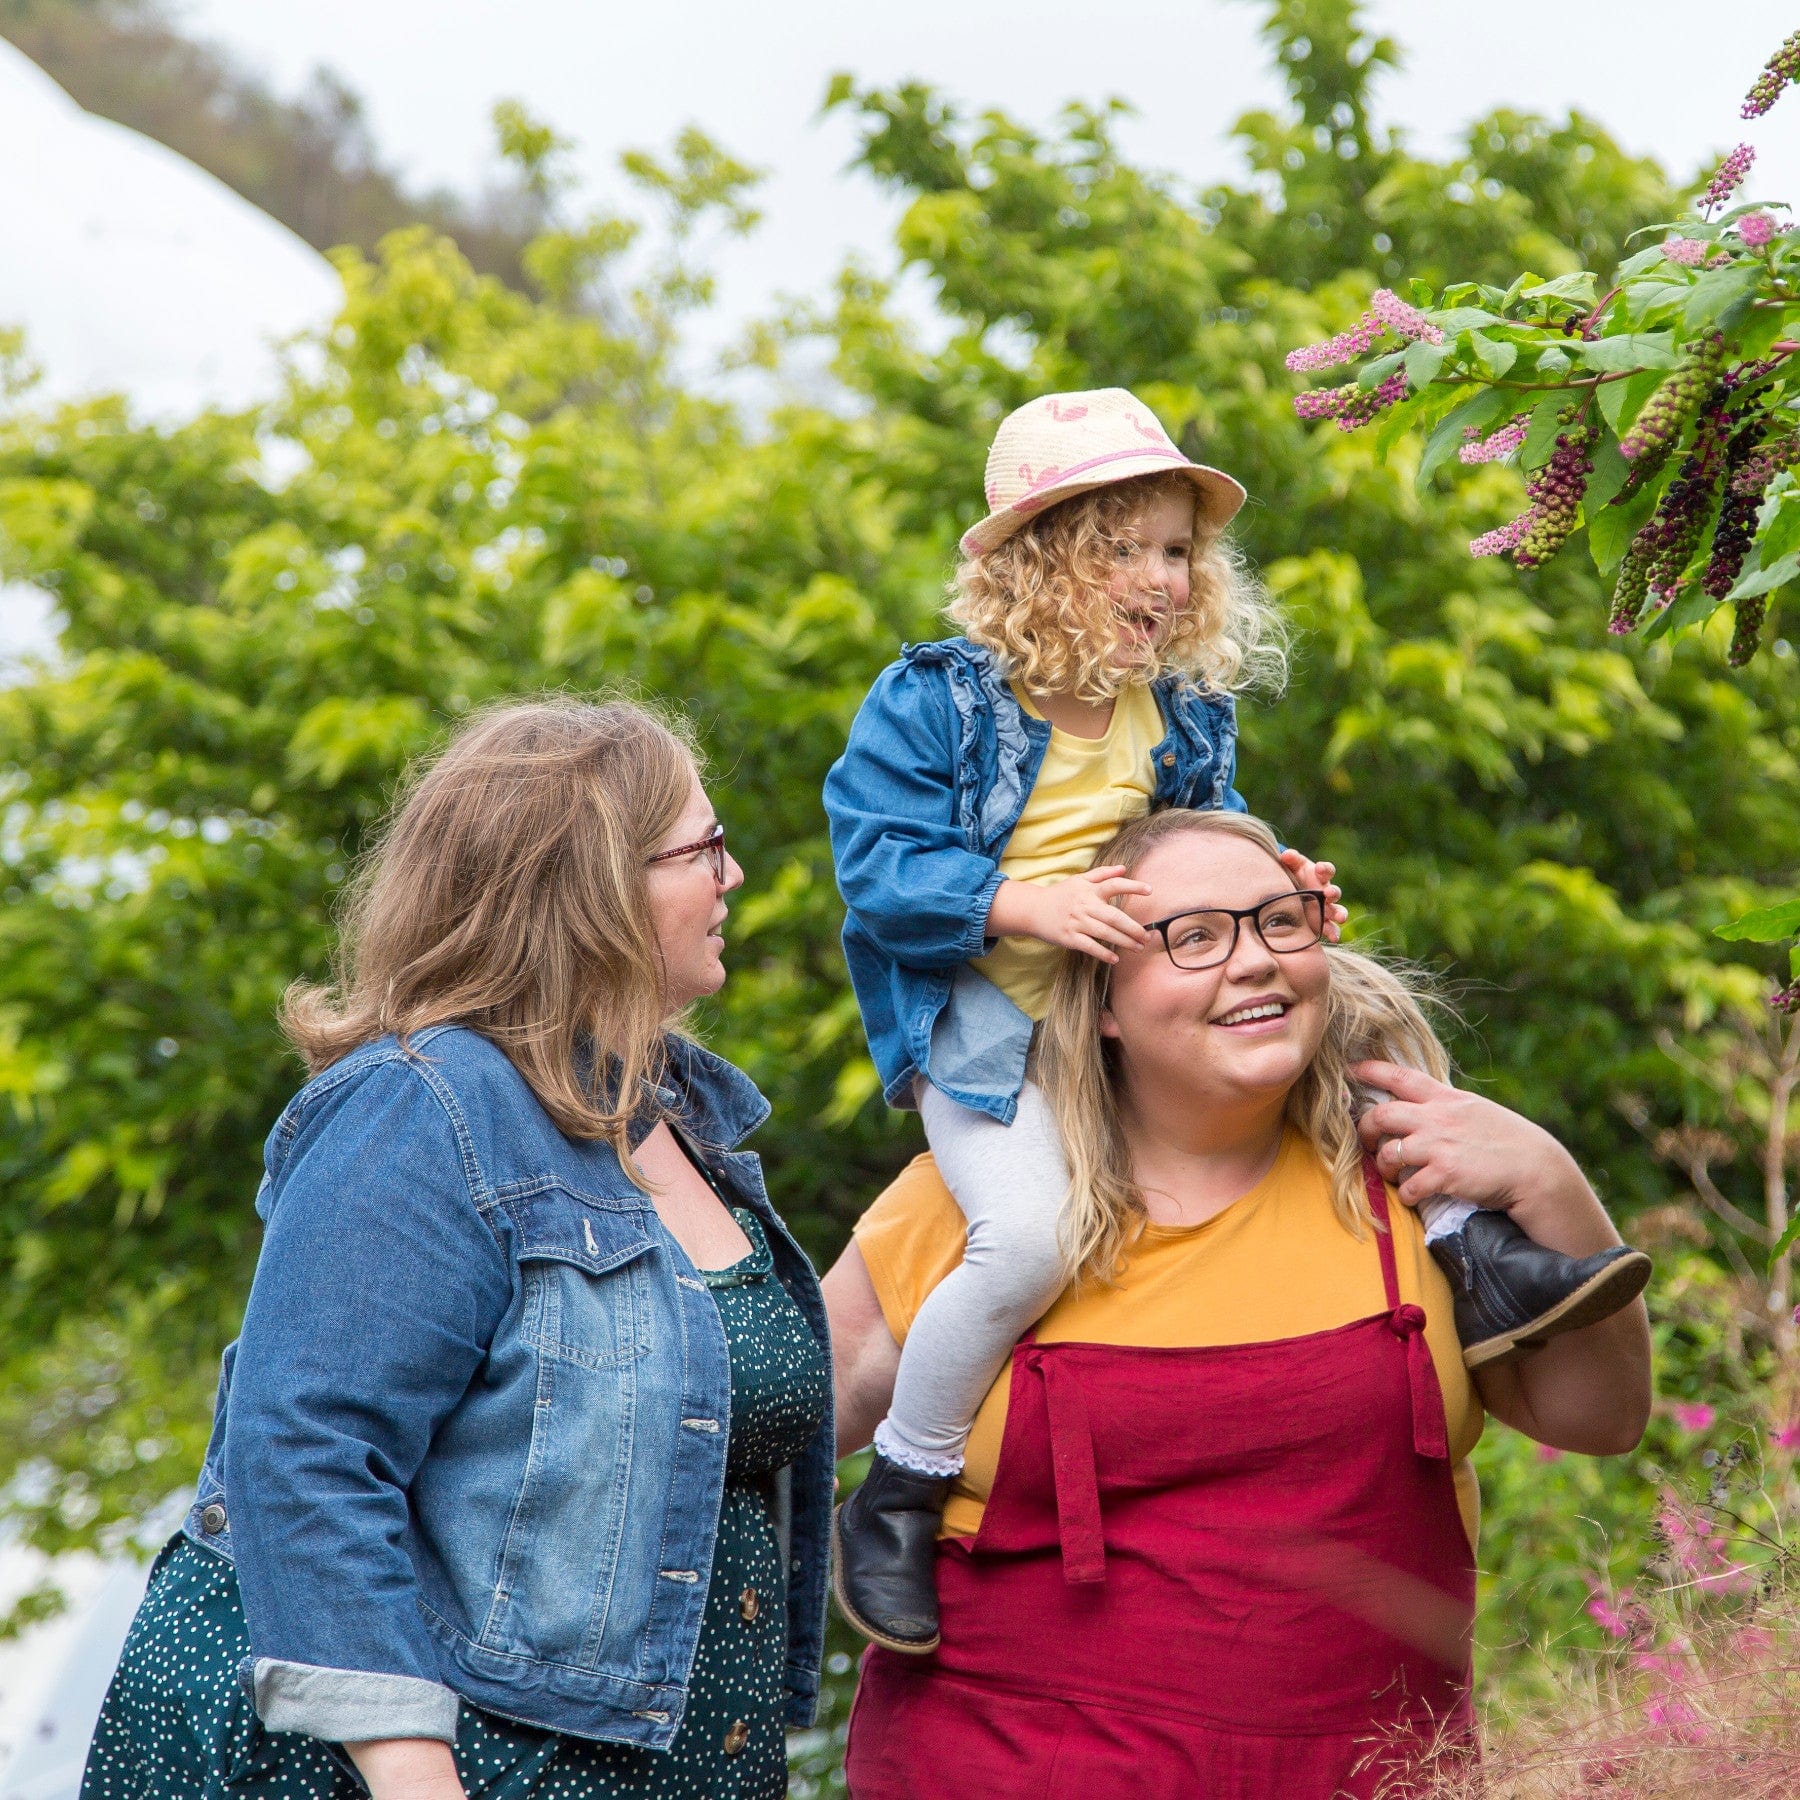 Family enjoying outdoor time together with a woman smiling at a child on her shoulders, another woman looking at them, greenery in the background, casual clothing, happy family moment, nature setting, bonding, and togetherness.